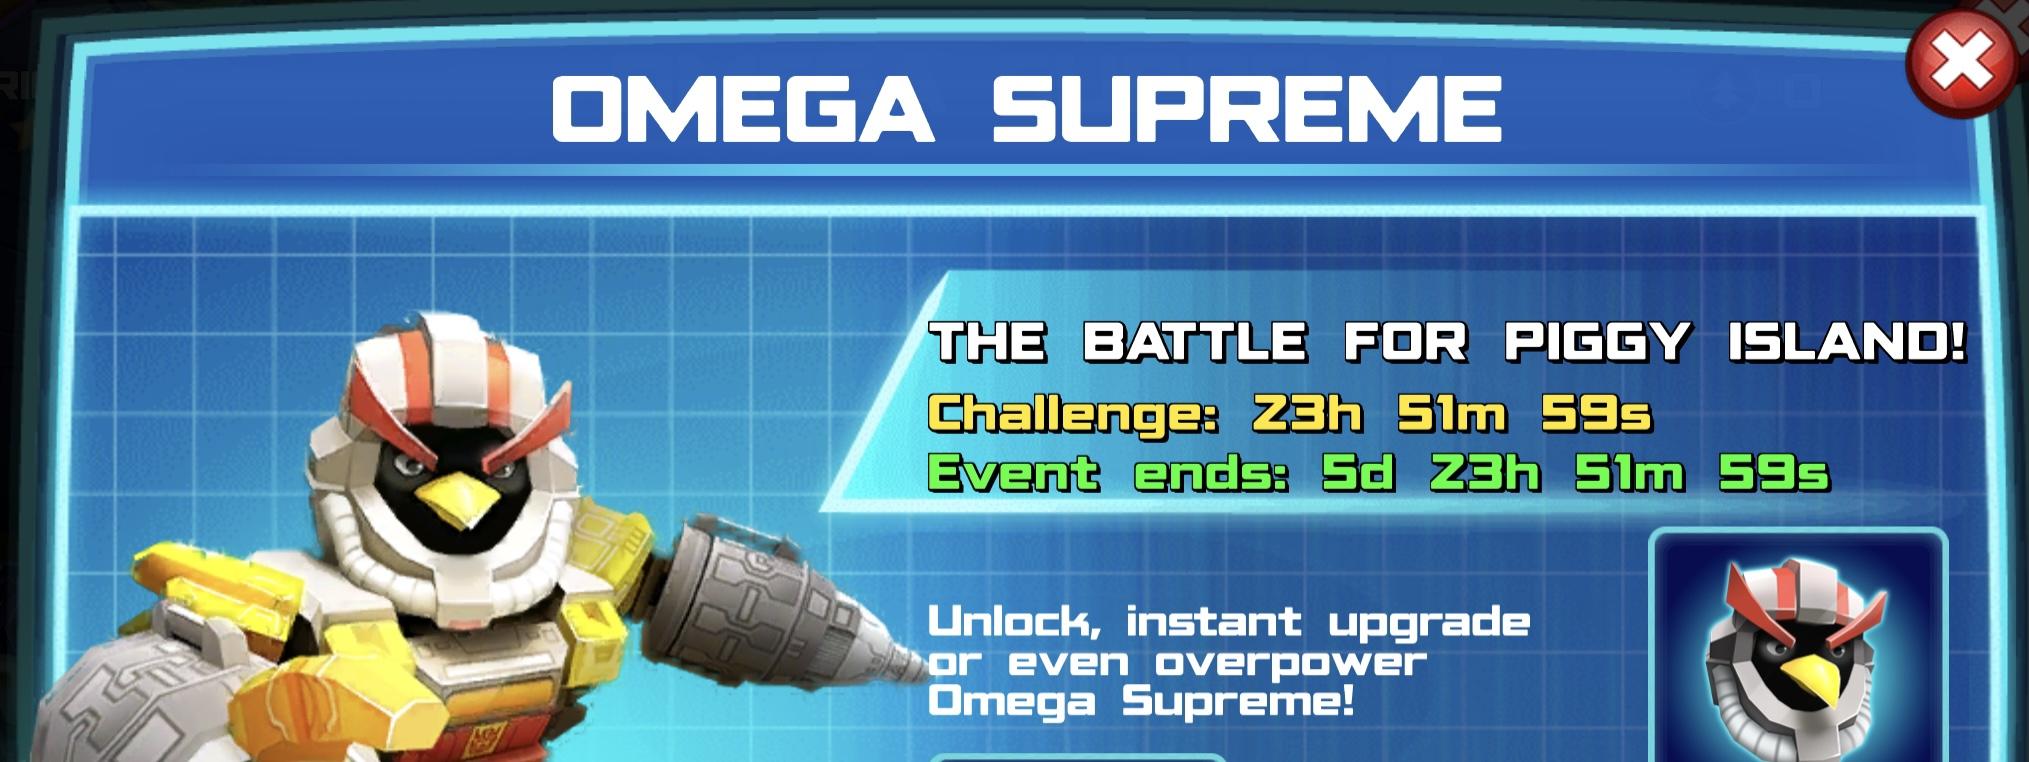 The event banner for Omega Supreme